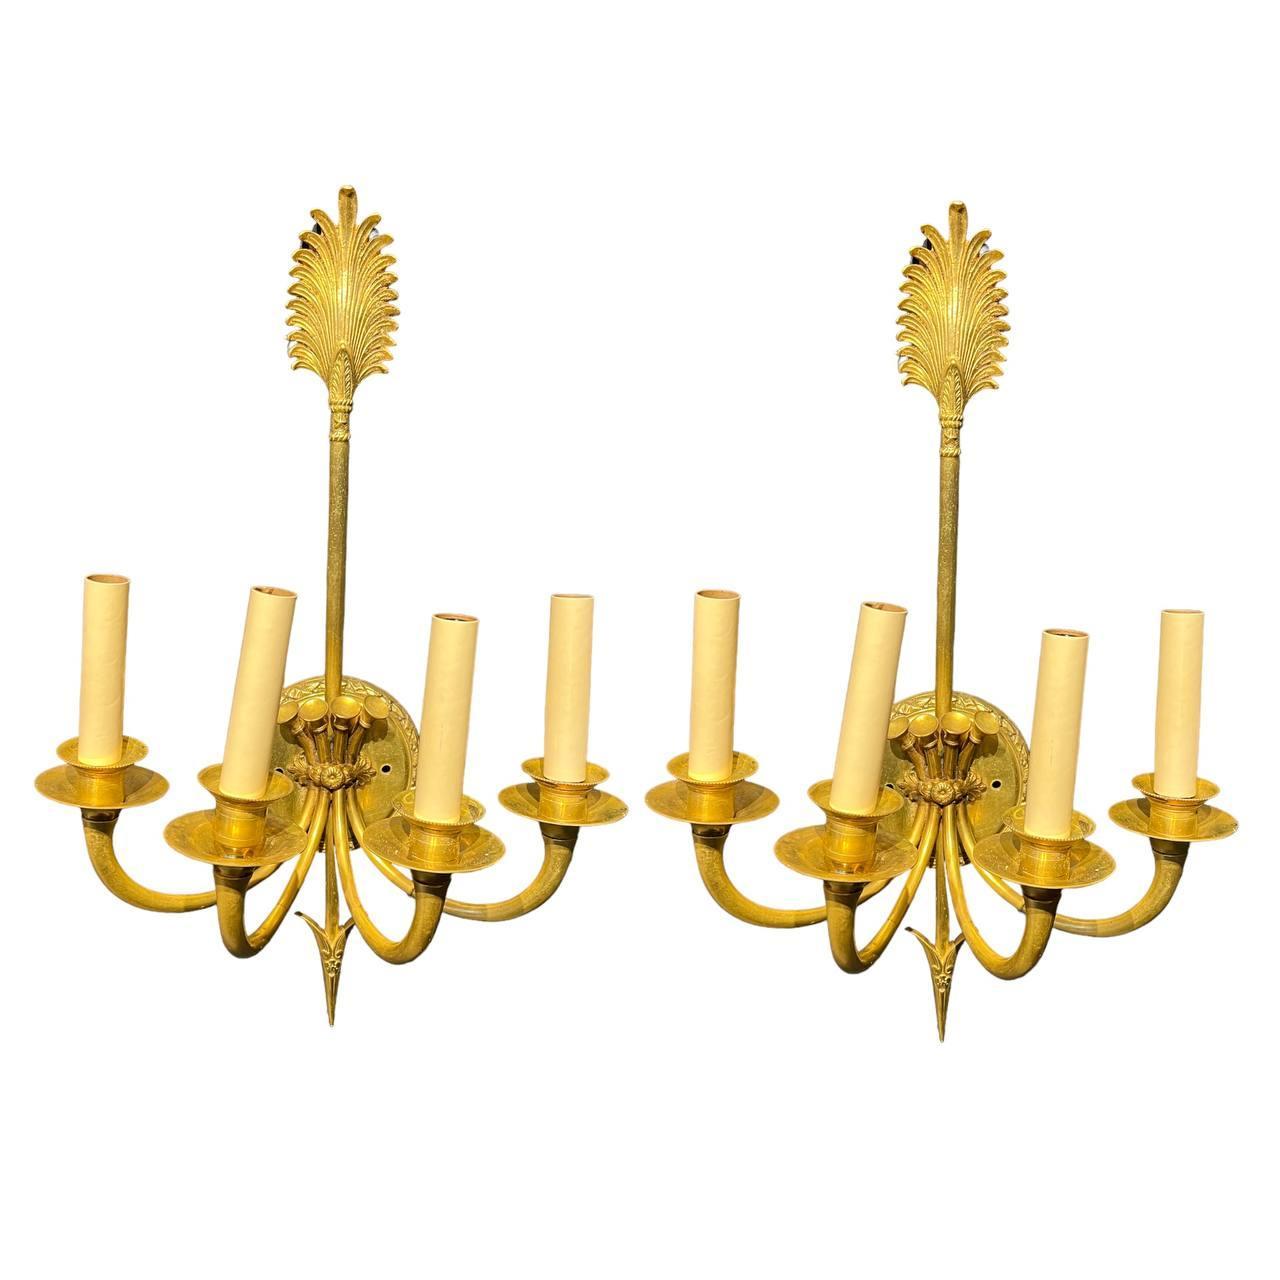 1930's French Empire 4 Lights Sconces For Sale